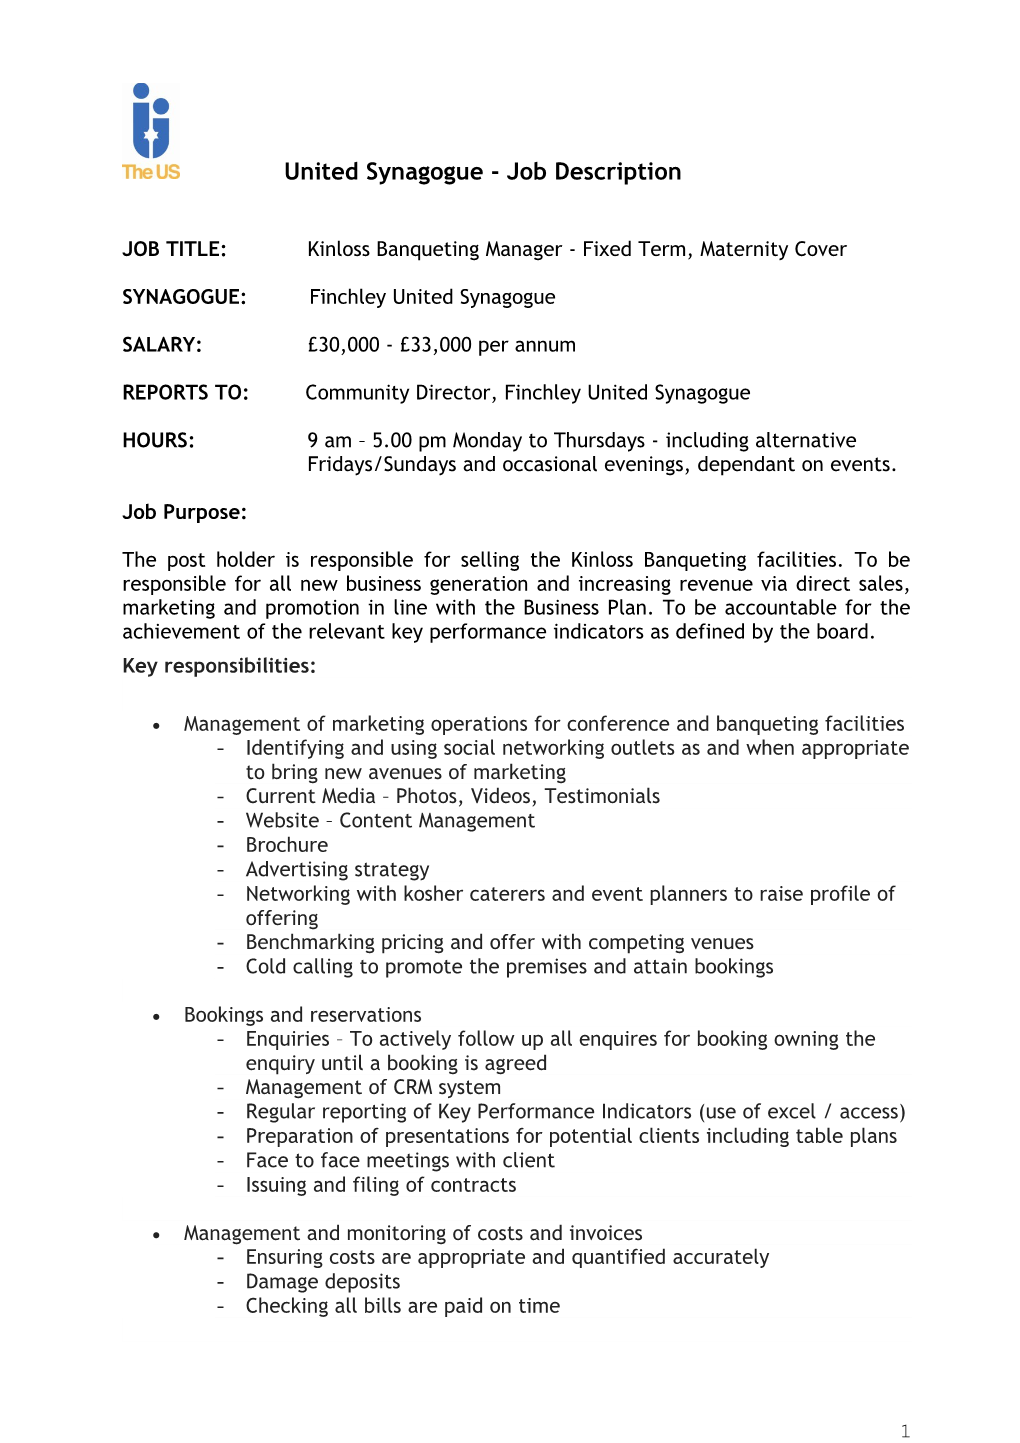 Job Title: Kinloss Banqueting Manager - Fixed Term, Maternity Cover